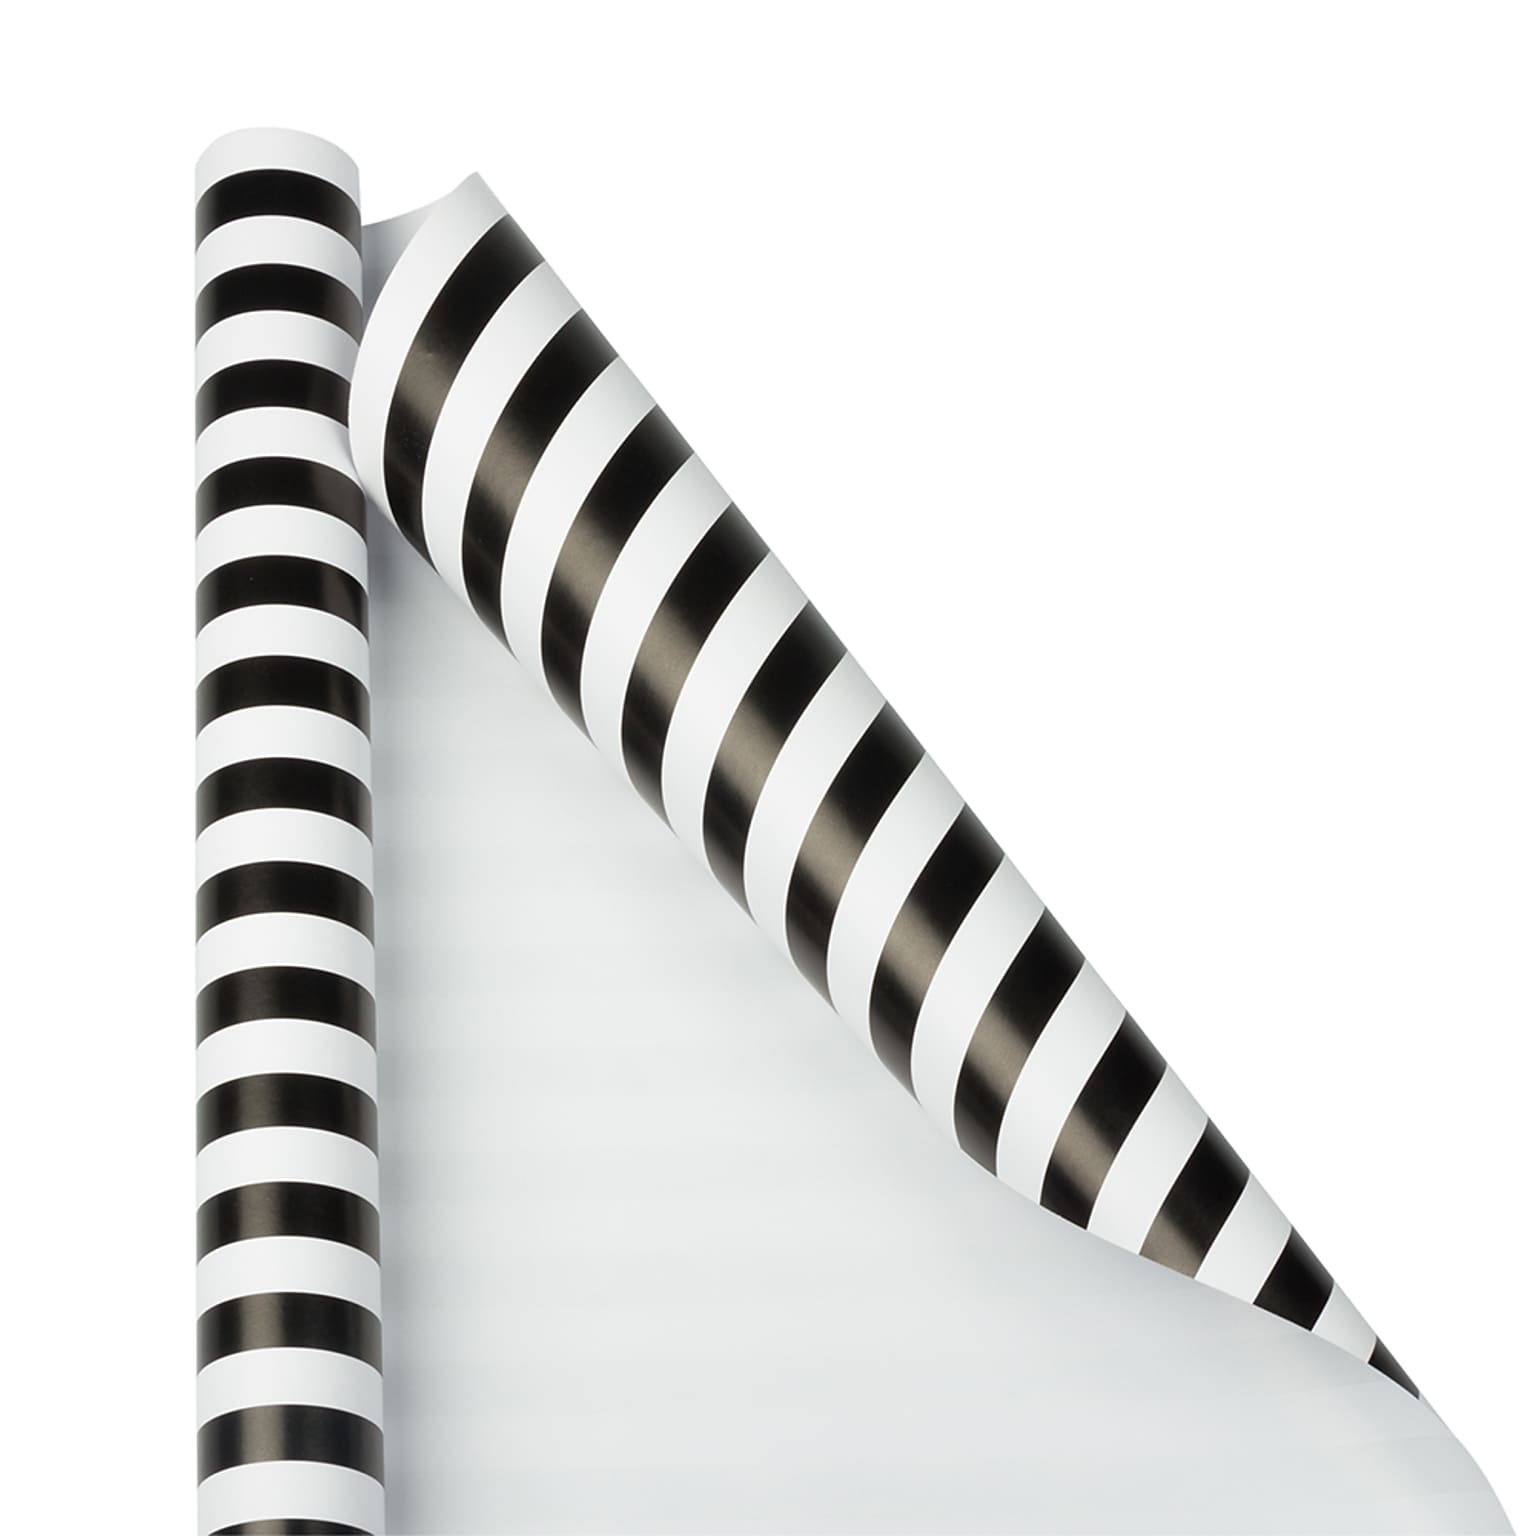 JAM Paper Gift Wrap, Striped Wrapping Paper, 25 Sq. Ft, Black & White Stripes, Roll Sold Individually (226531182)